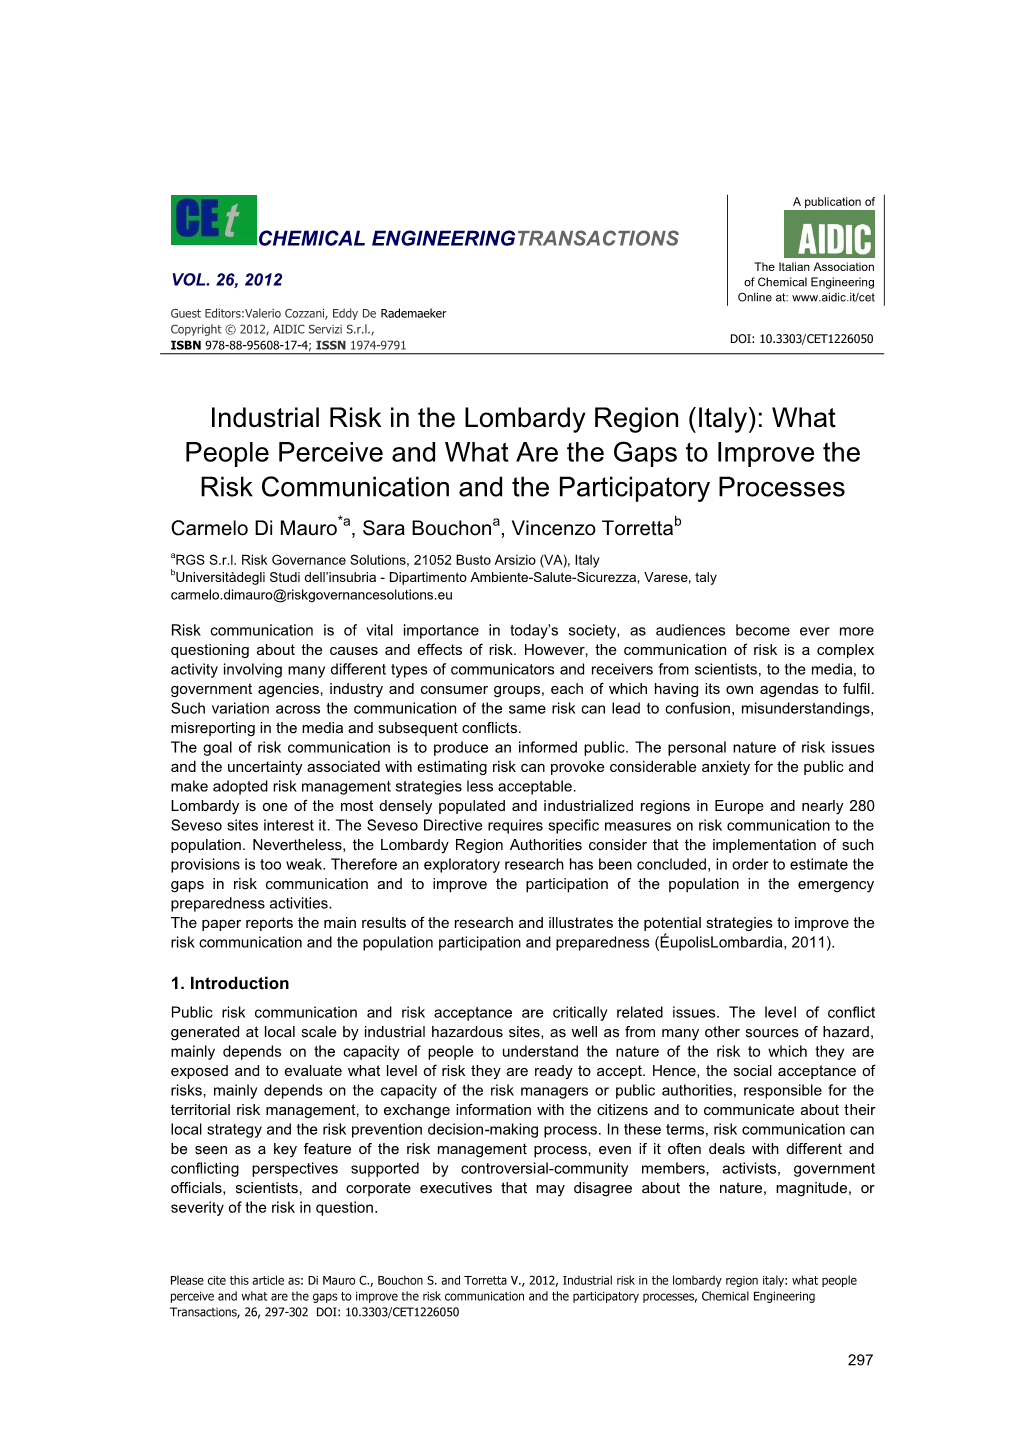 Industrial Risk in the Lombardy Region (Italy): What People